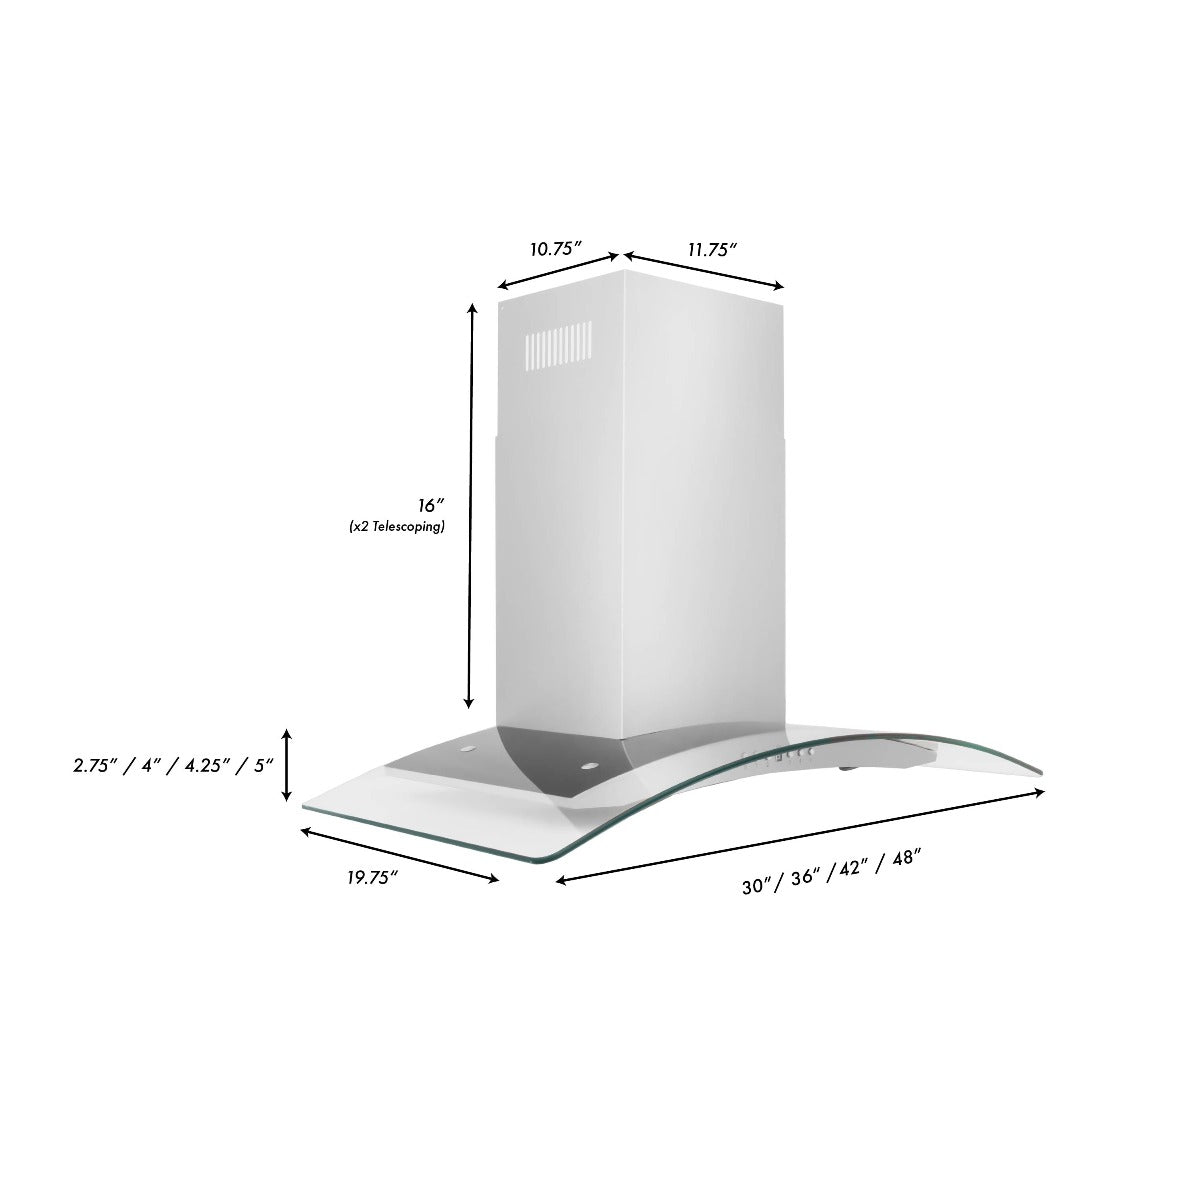 ZLINE 48 in. Convertible Vent Wall Mount Range Hood in Stainless Steel & Glass, KN4-48 - Smart Kitchen Lab